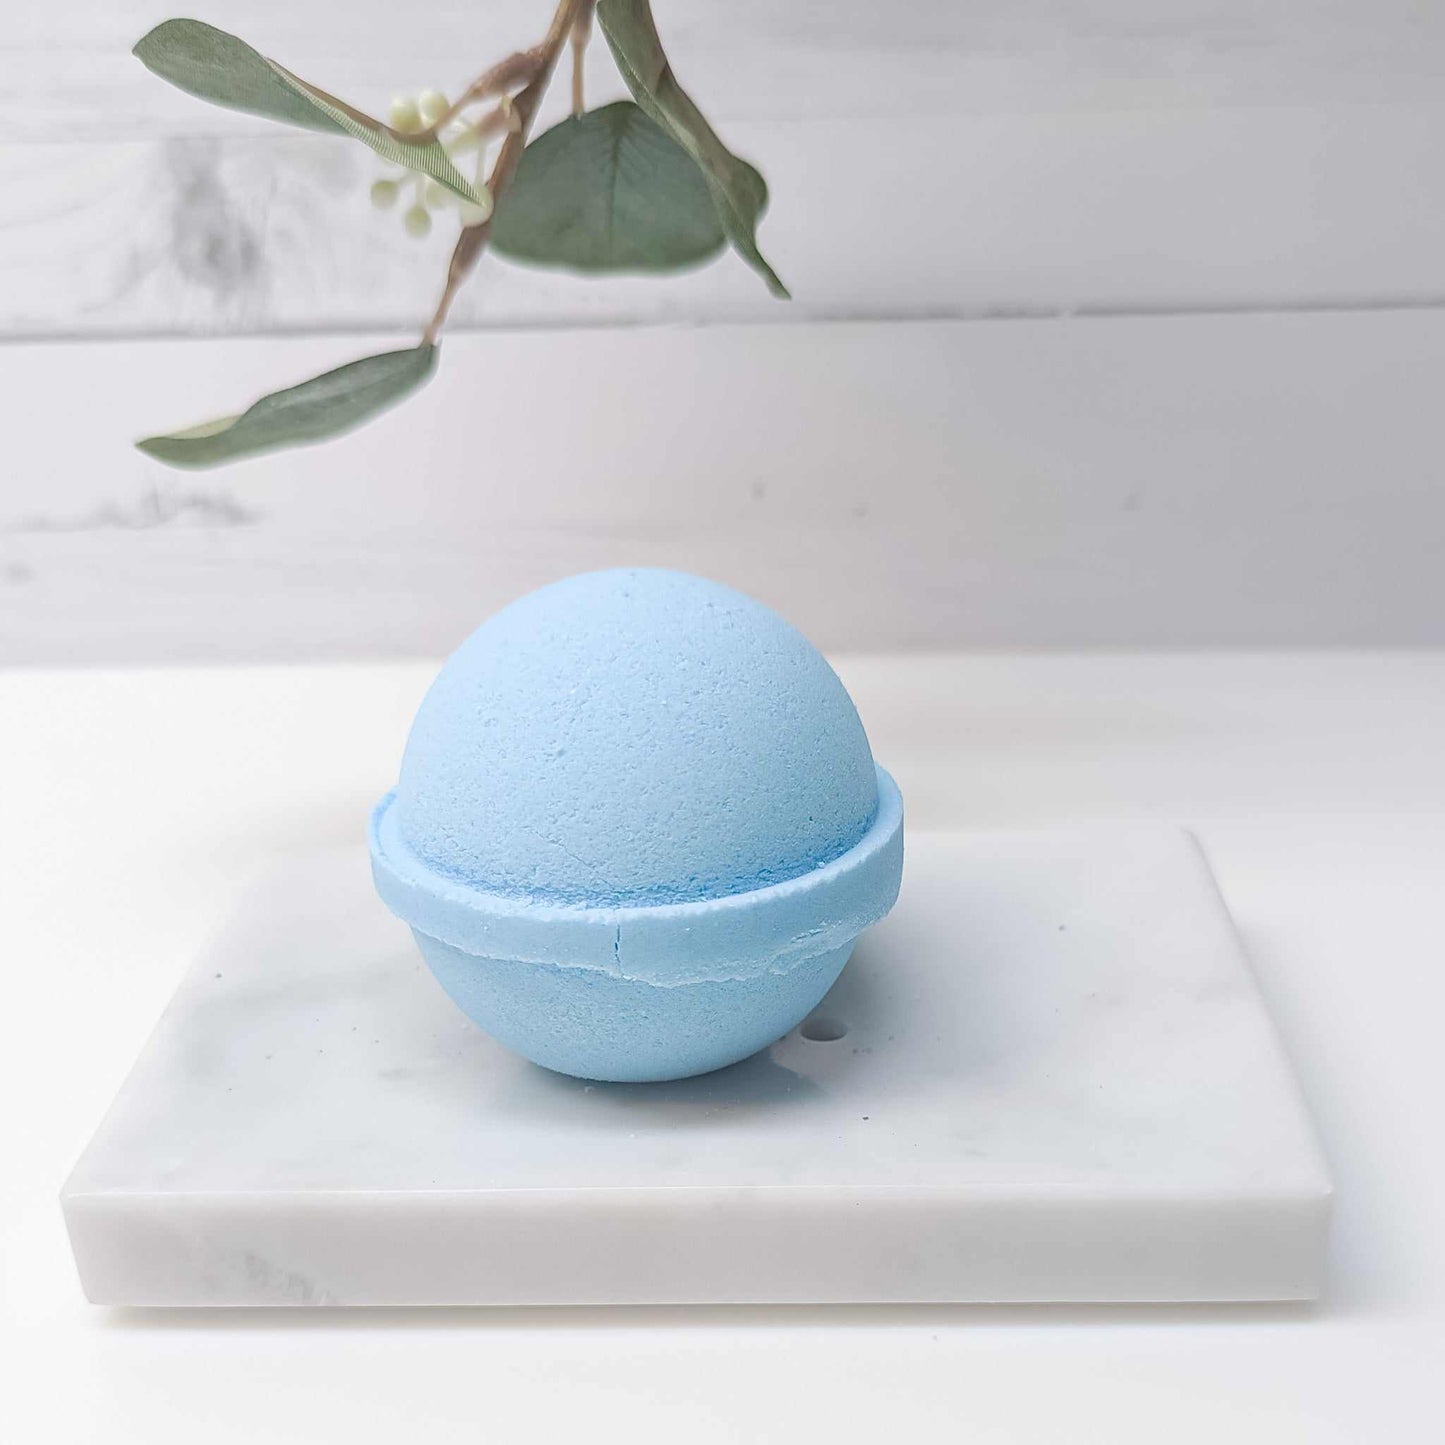  Bay Rum bath bomb, handcrafted for a luxurious and natural bath experience | CG Pure Wash